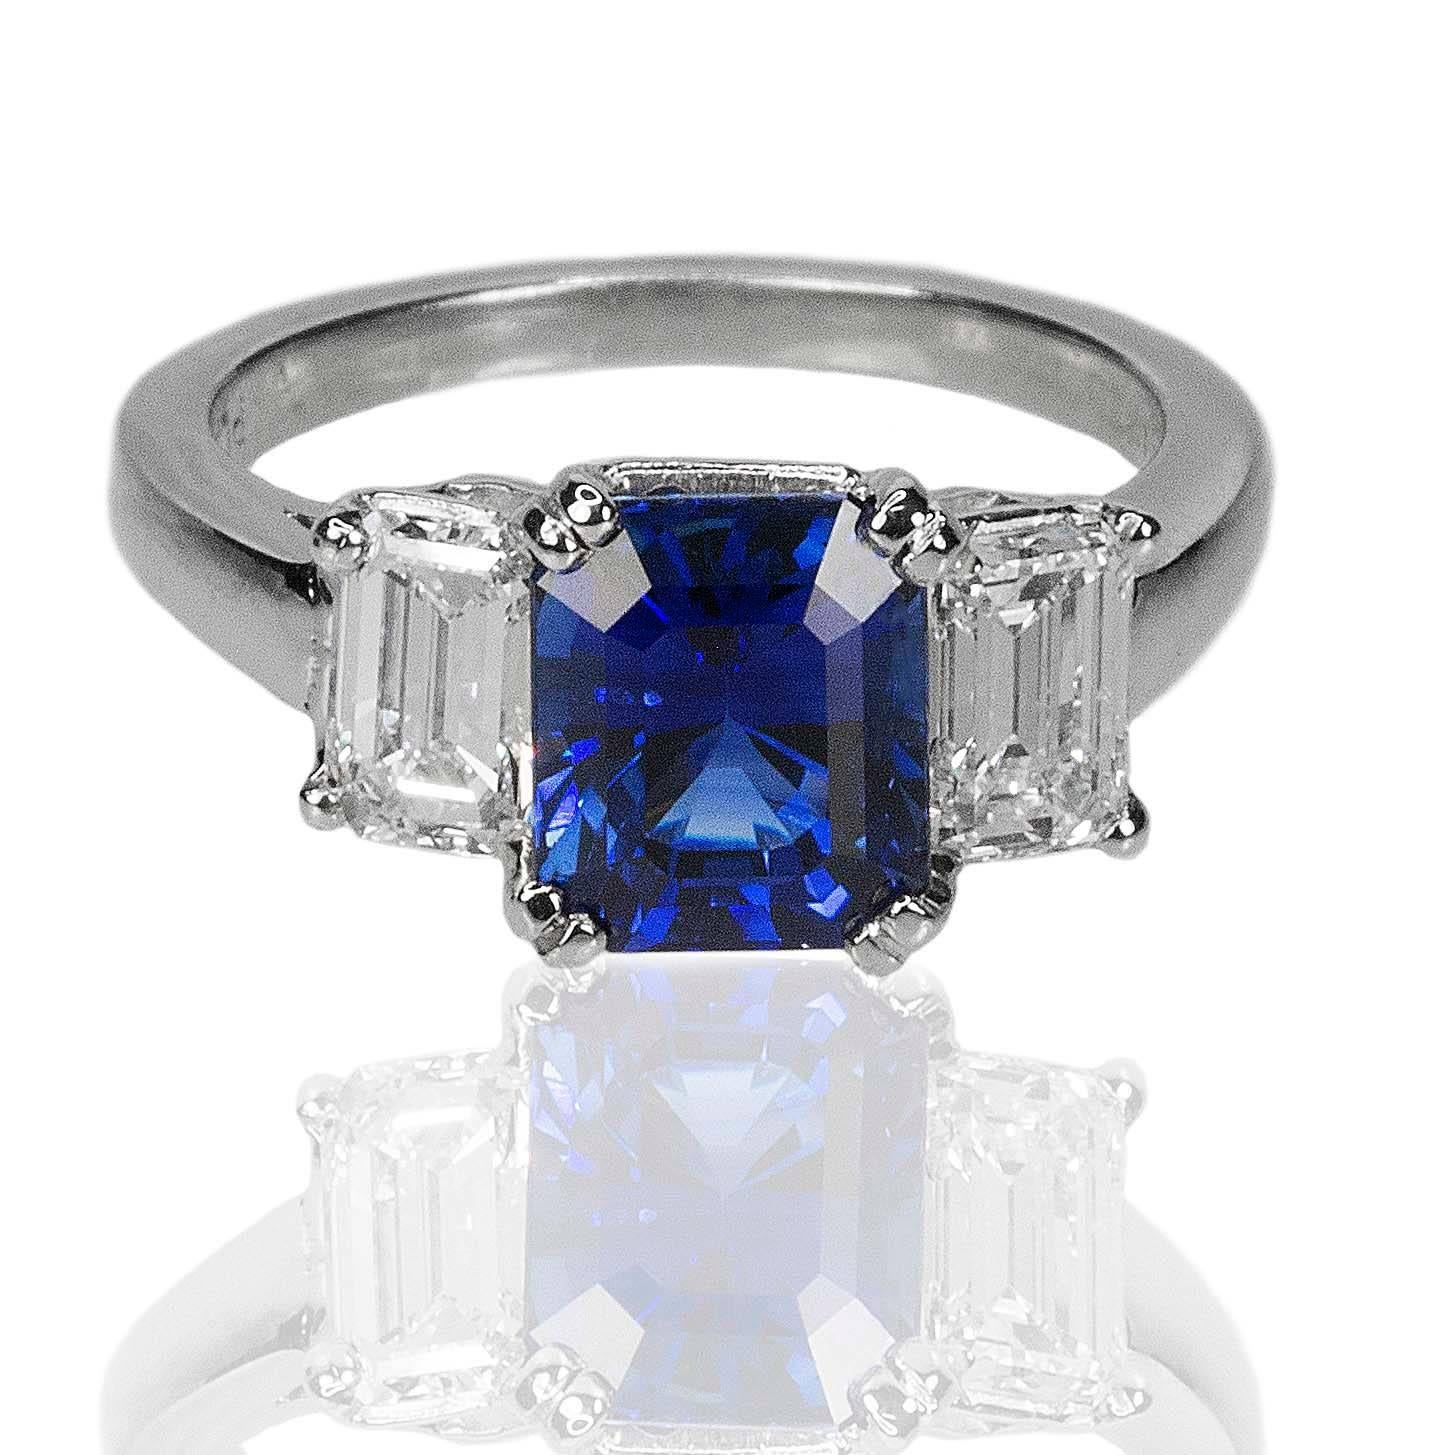 Platinum Ring with one AGL certified 2.98 carat emerald cut Royal Blue Sapphire and one0.57 carat  GIA certified E color VS2 clarity emerald cut diamond and GIA certified 0.56 carat D color VS1 clarity emerald cut diamond, 7.14g